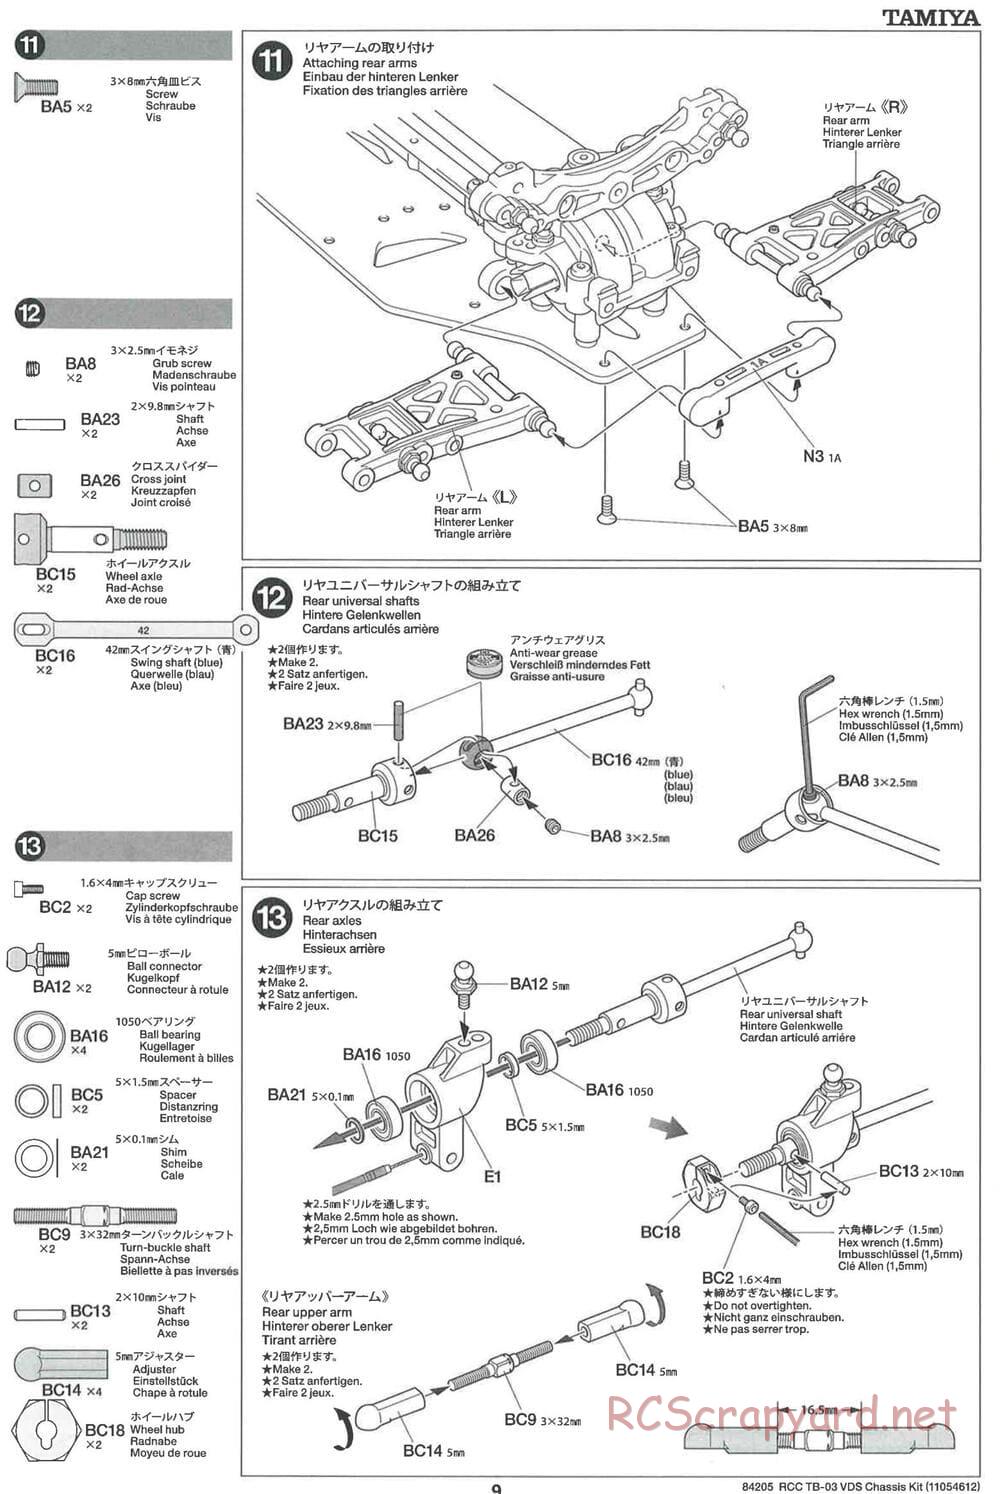 Tamiya - TB-03 VDS Drift Spec Chassis - Manual - Page 9